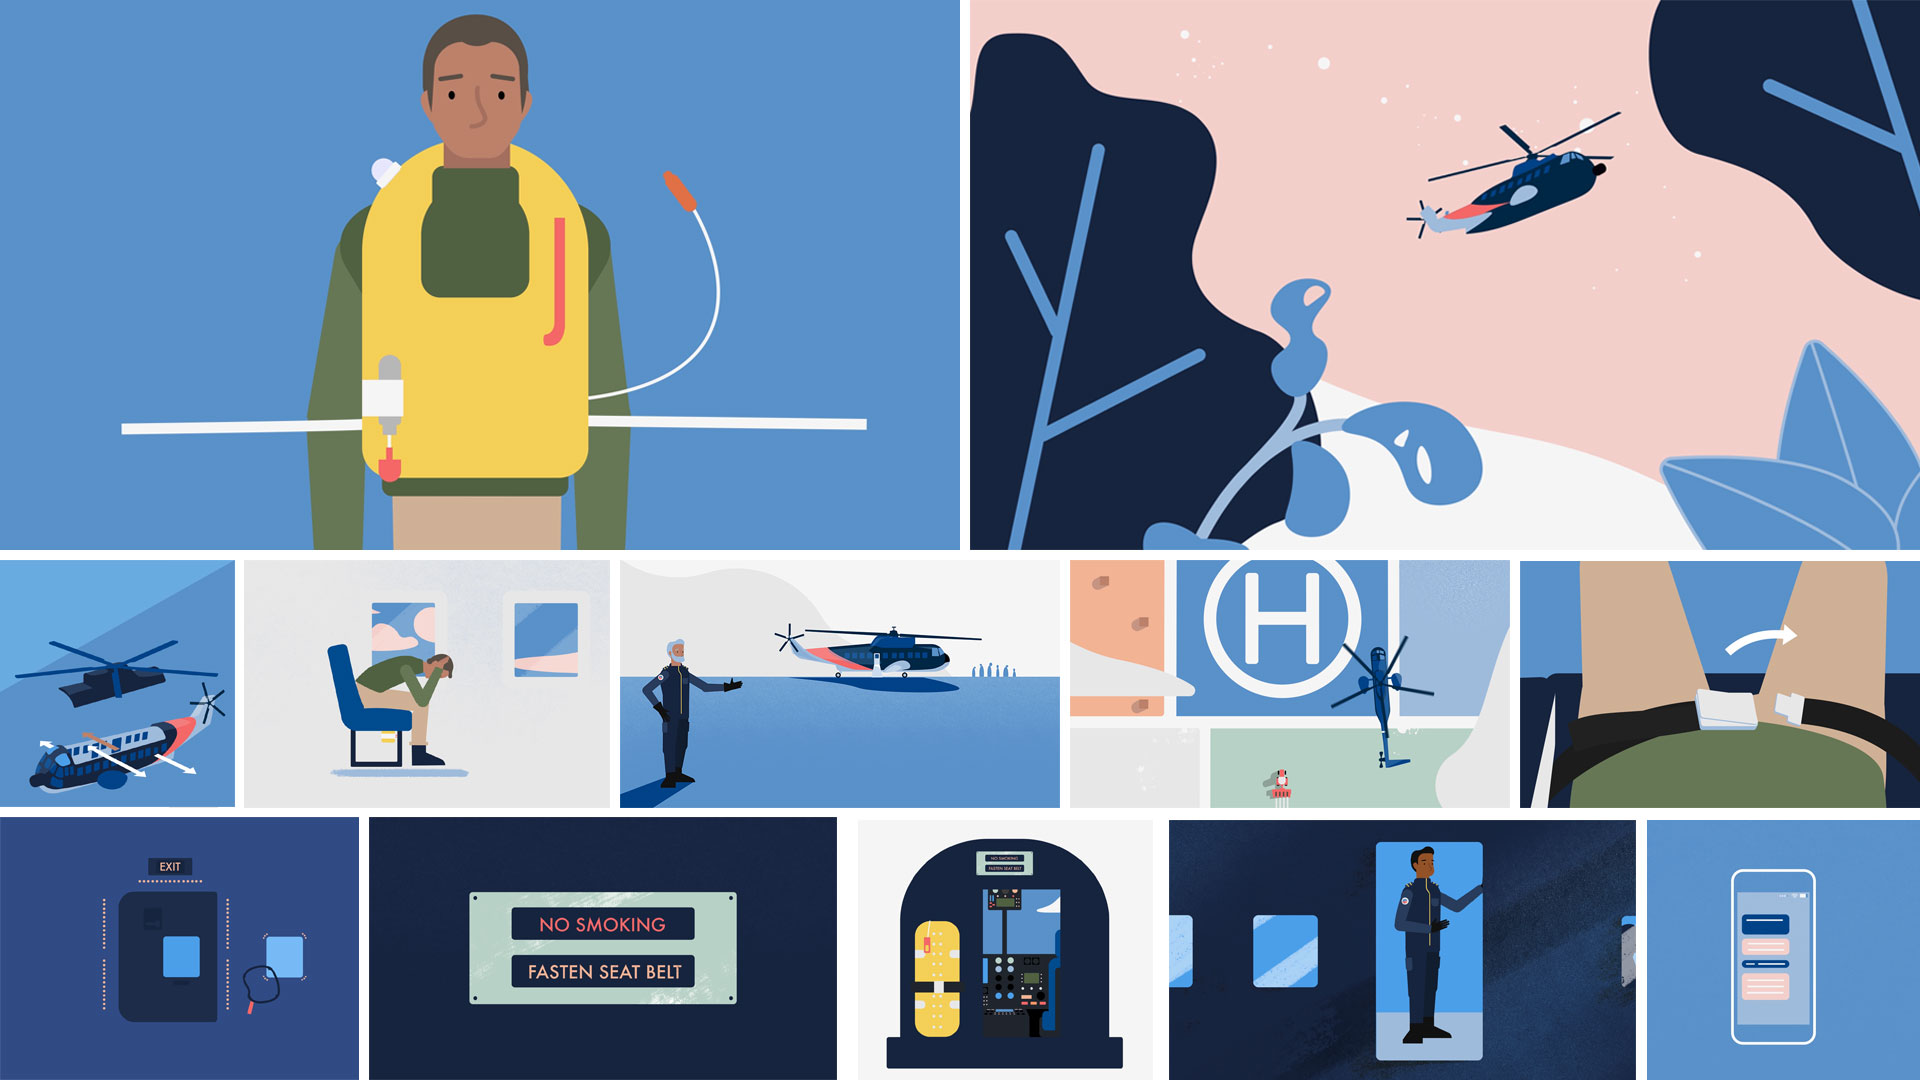 Helicopter Animated Health and Safety Videos